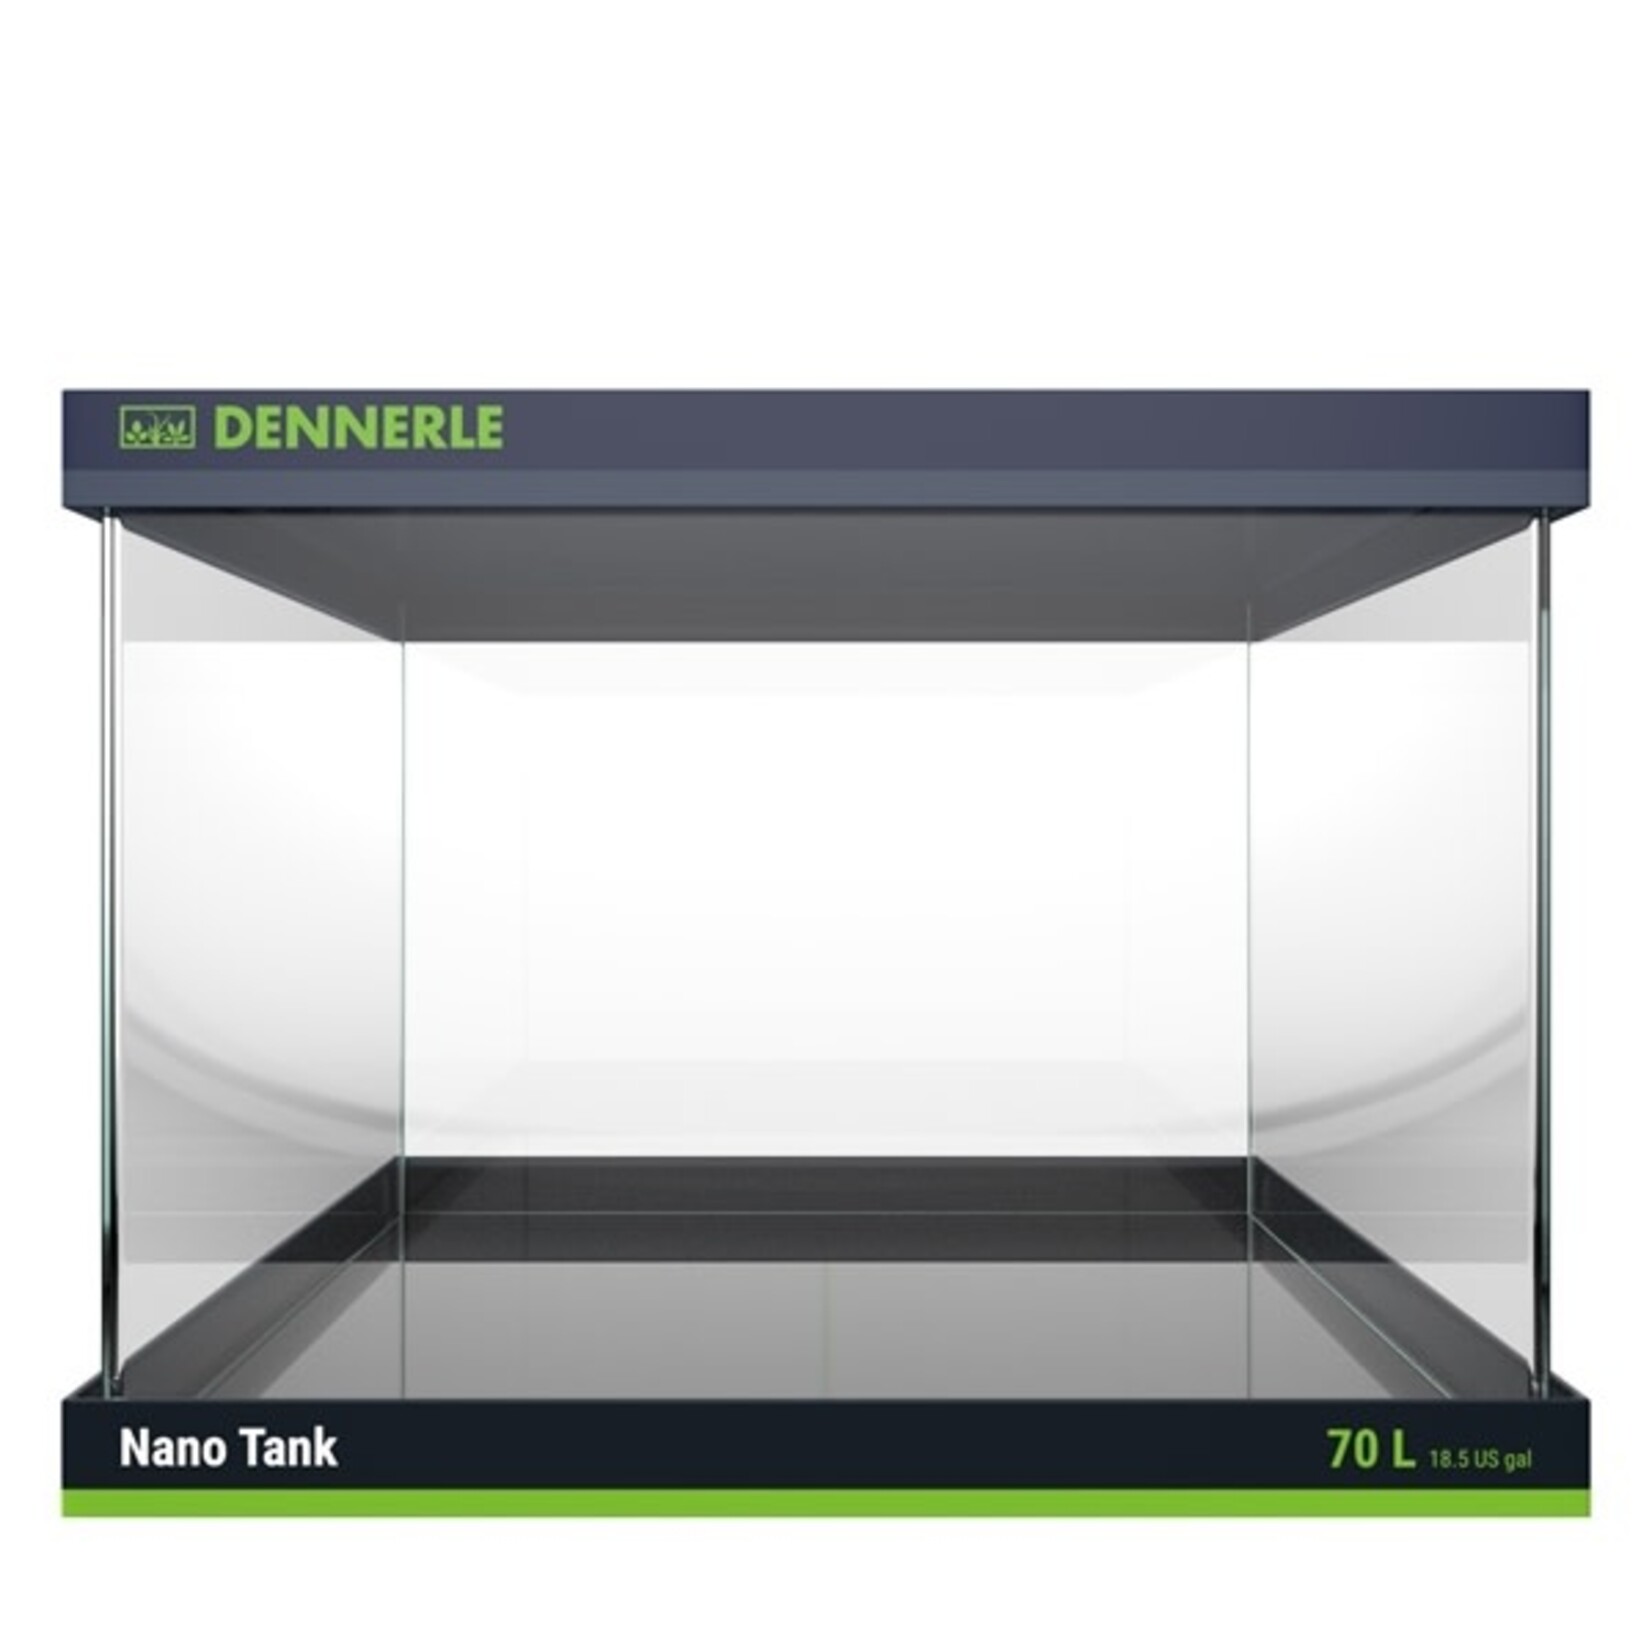 Dennerle DENNERLE NANO SCAPERS TANK 70 L